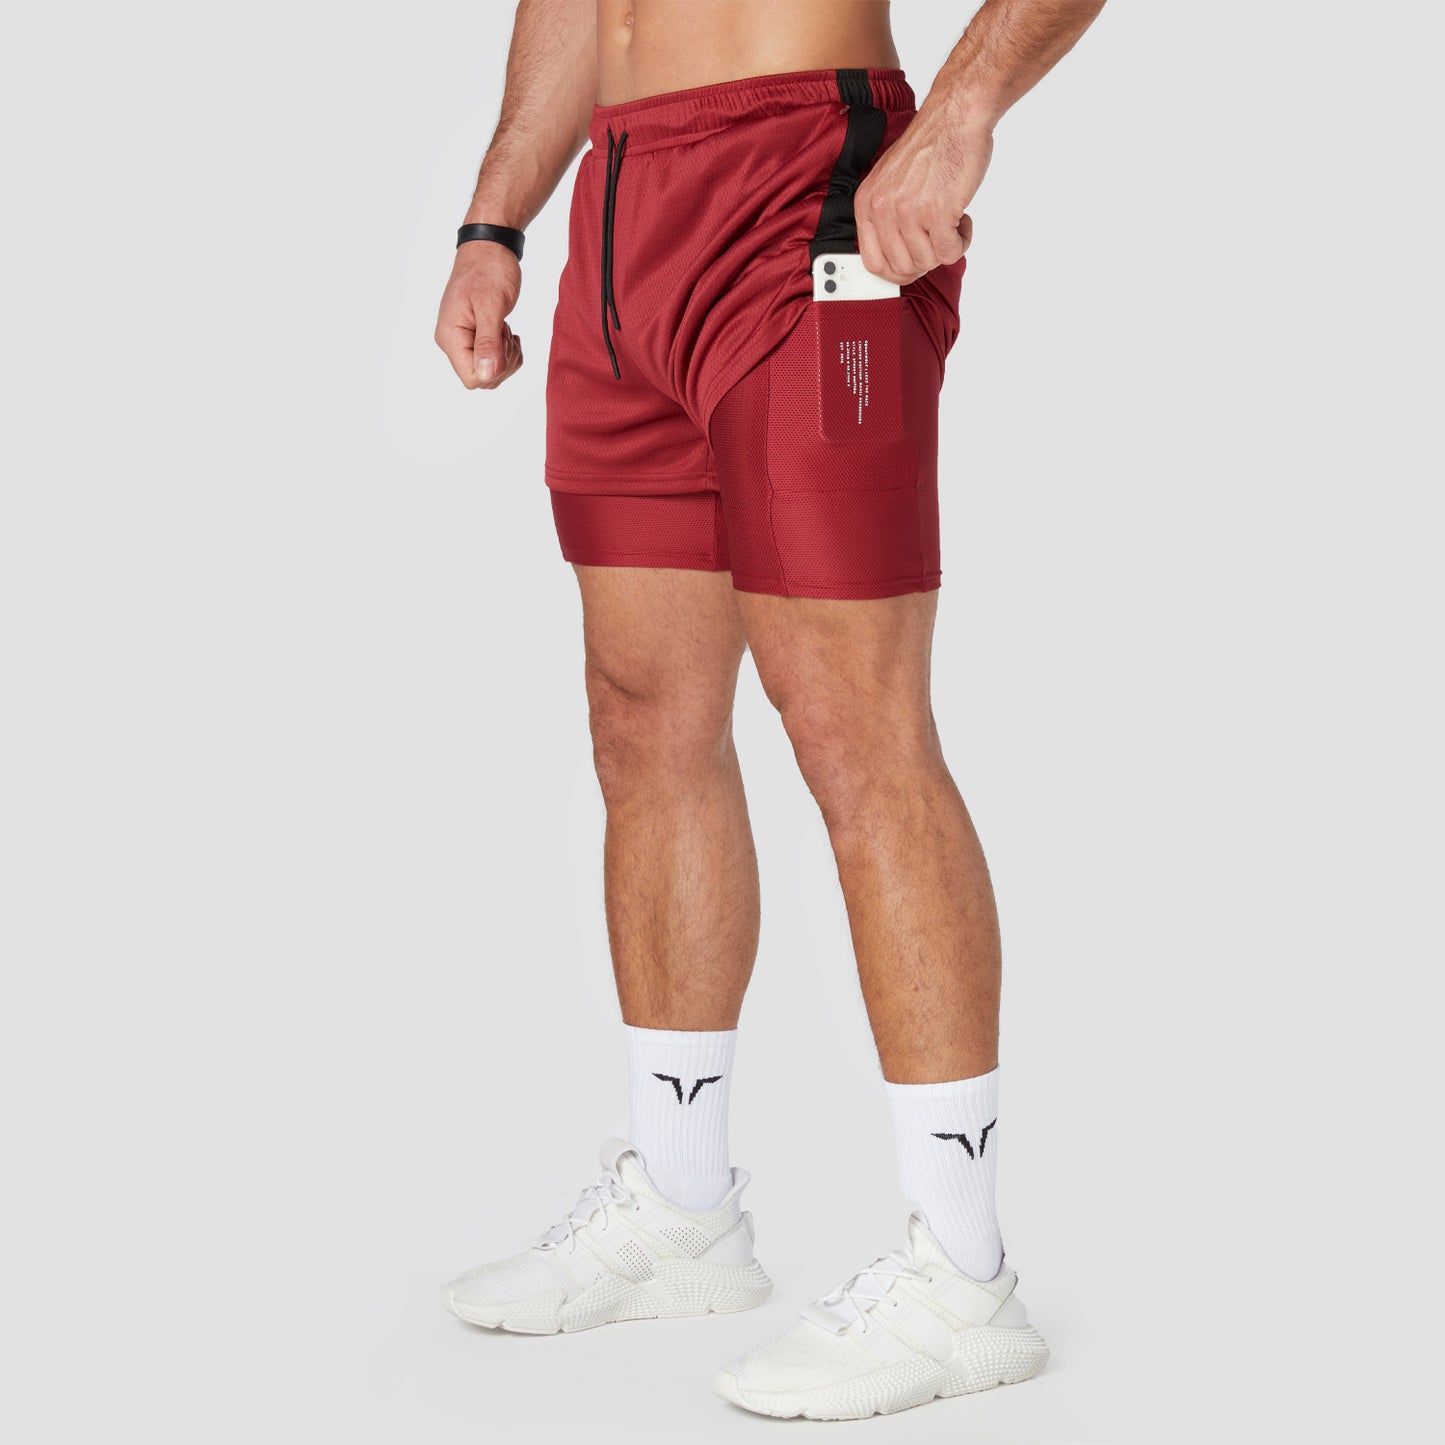 squatwolf-gym-wear-hybrid-performance-2-in-1-shorts-maroon-workout-shorts-for-men